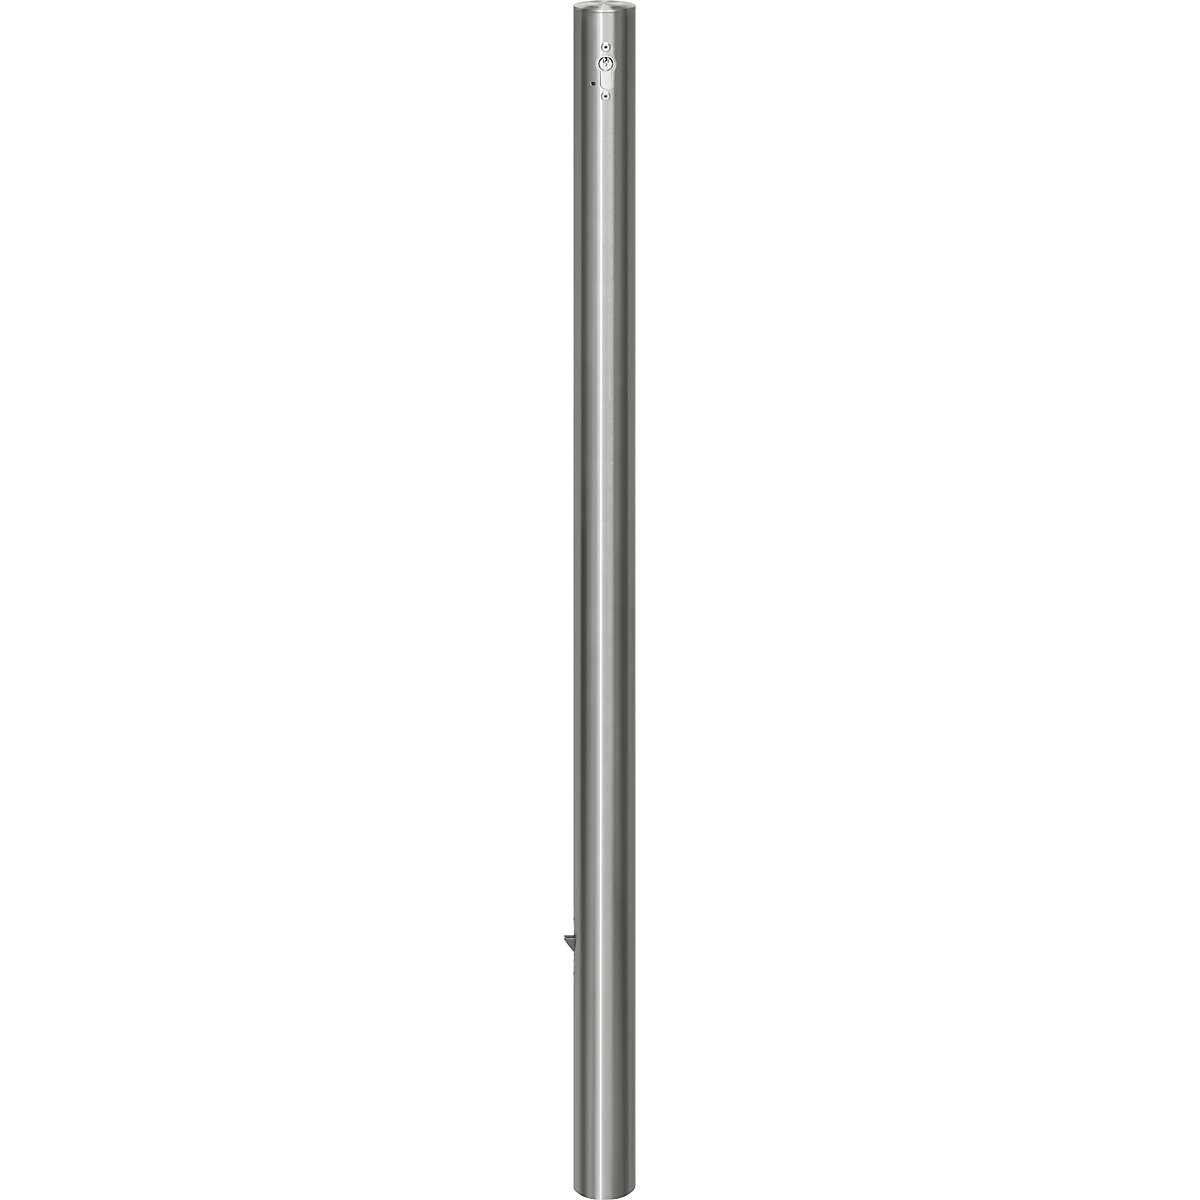 Stainless steel barrier post, with flat head, ground sleeve for concreting in, Ø 60 mm, profile cylinder-7